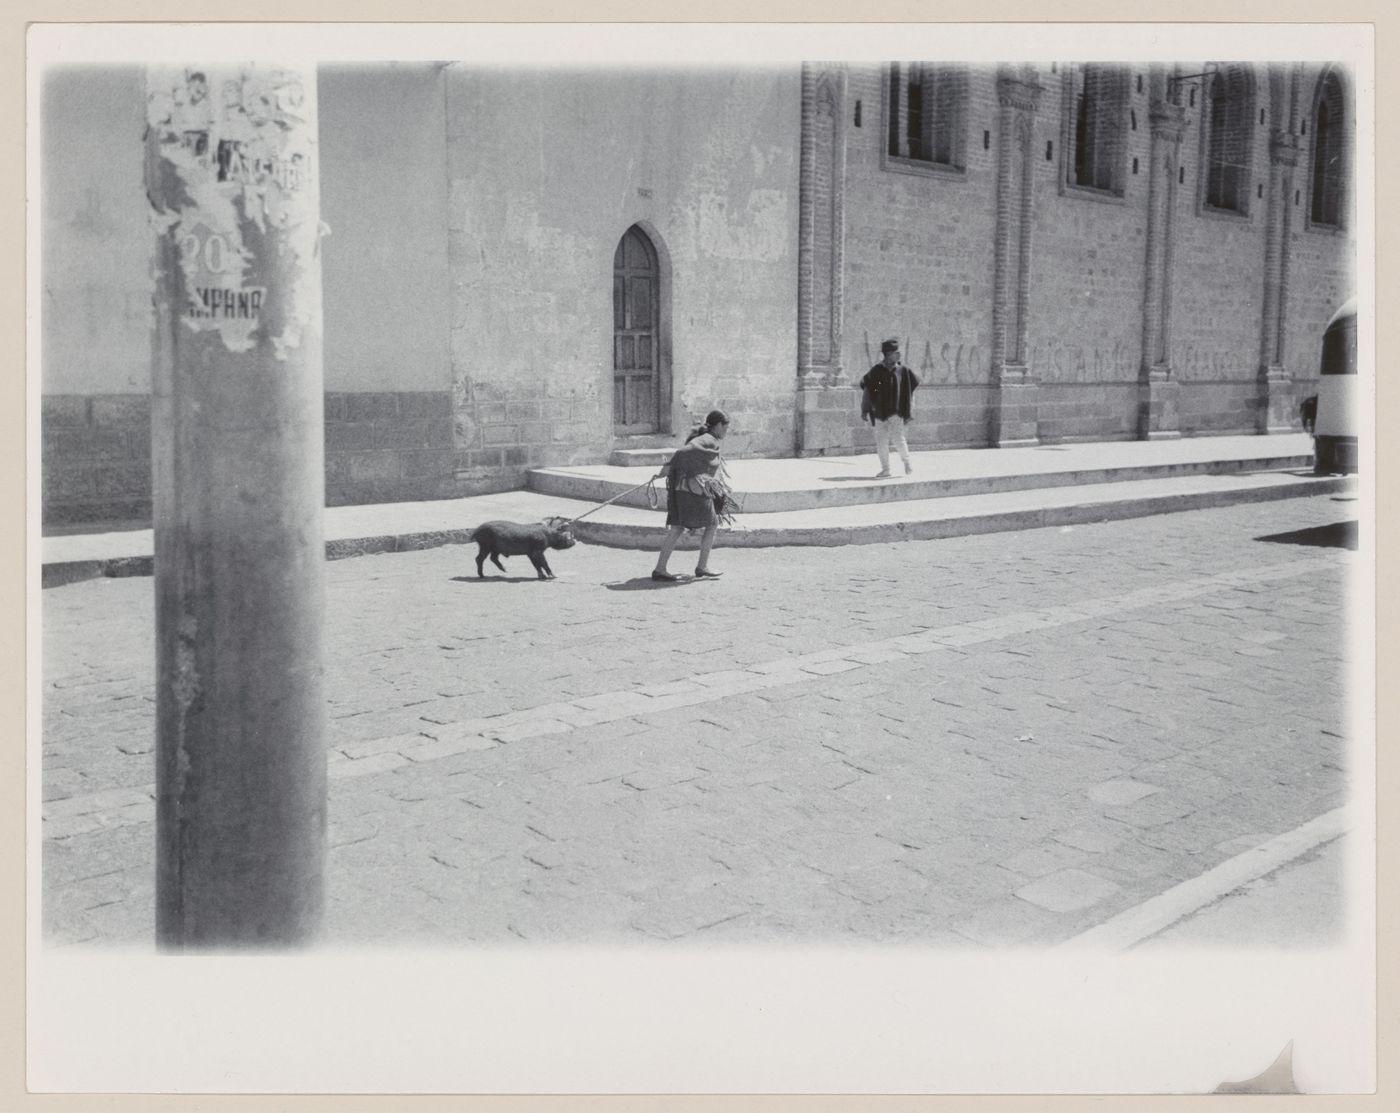 Woman with pig on leash, South America